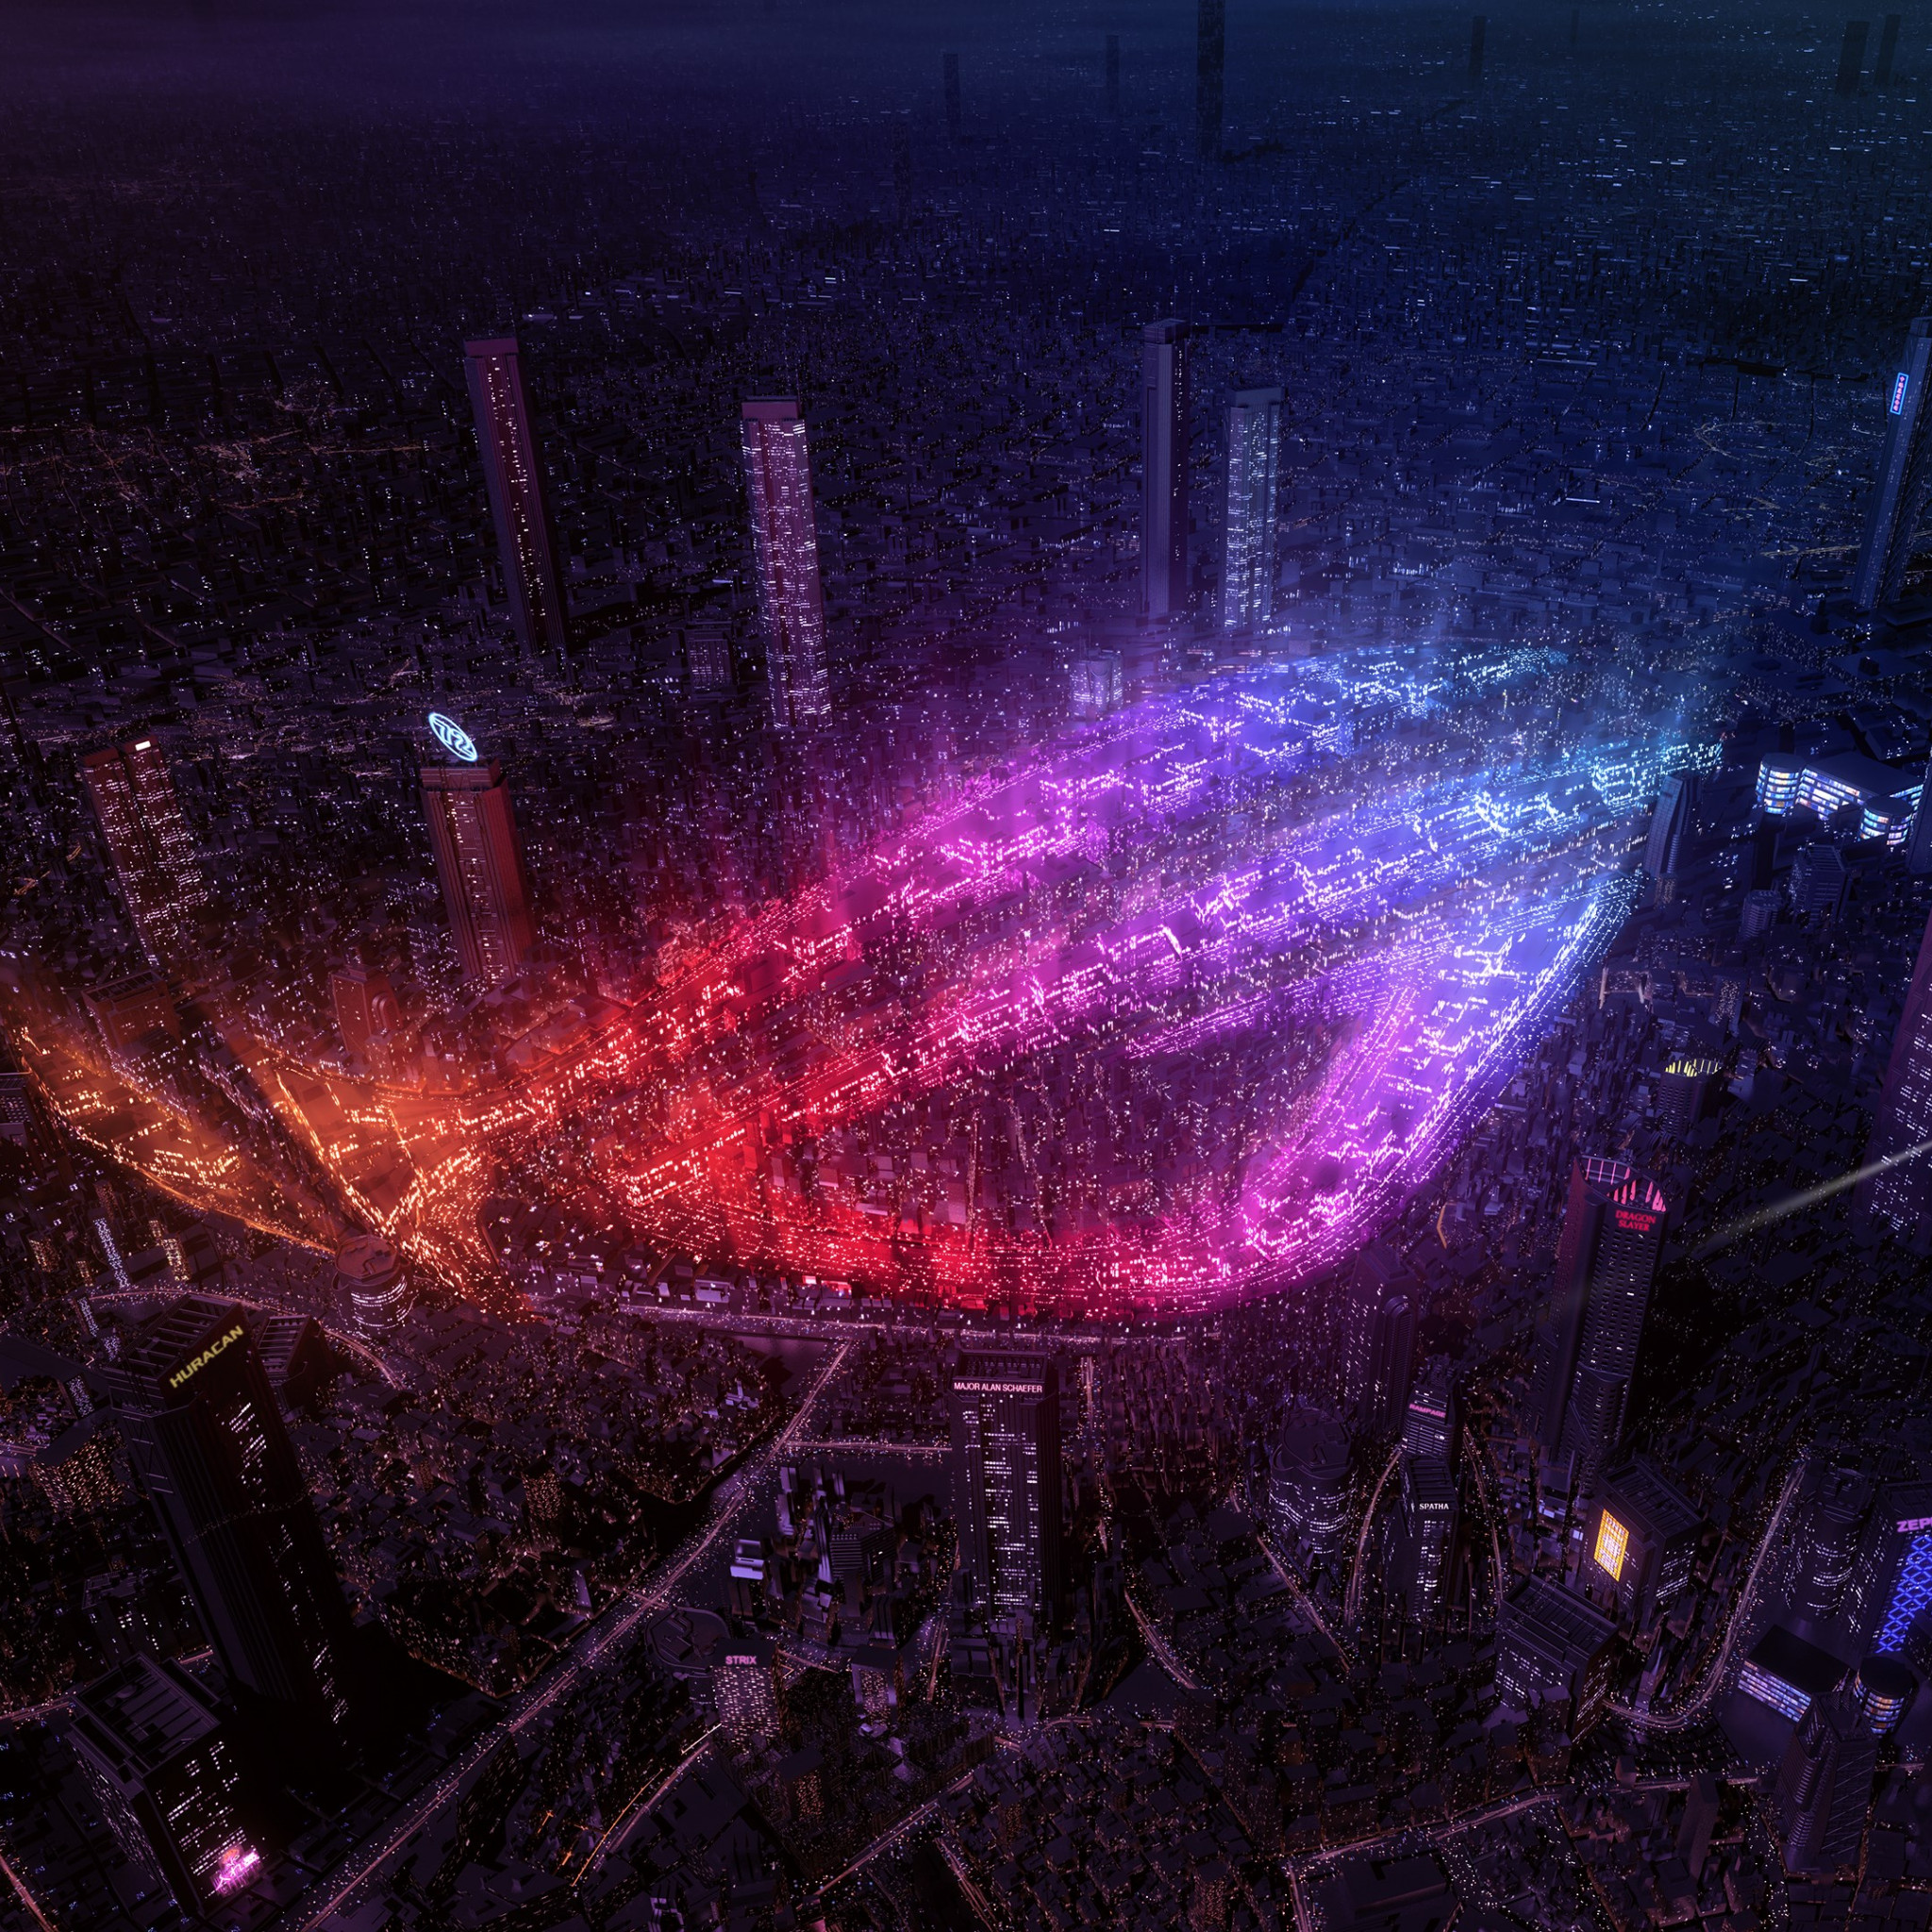 Download Wallpaper City Lights By Asus Rog 48x48